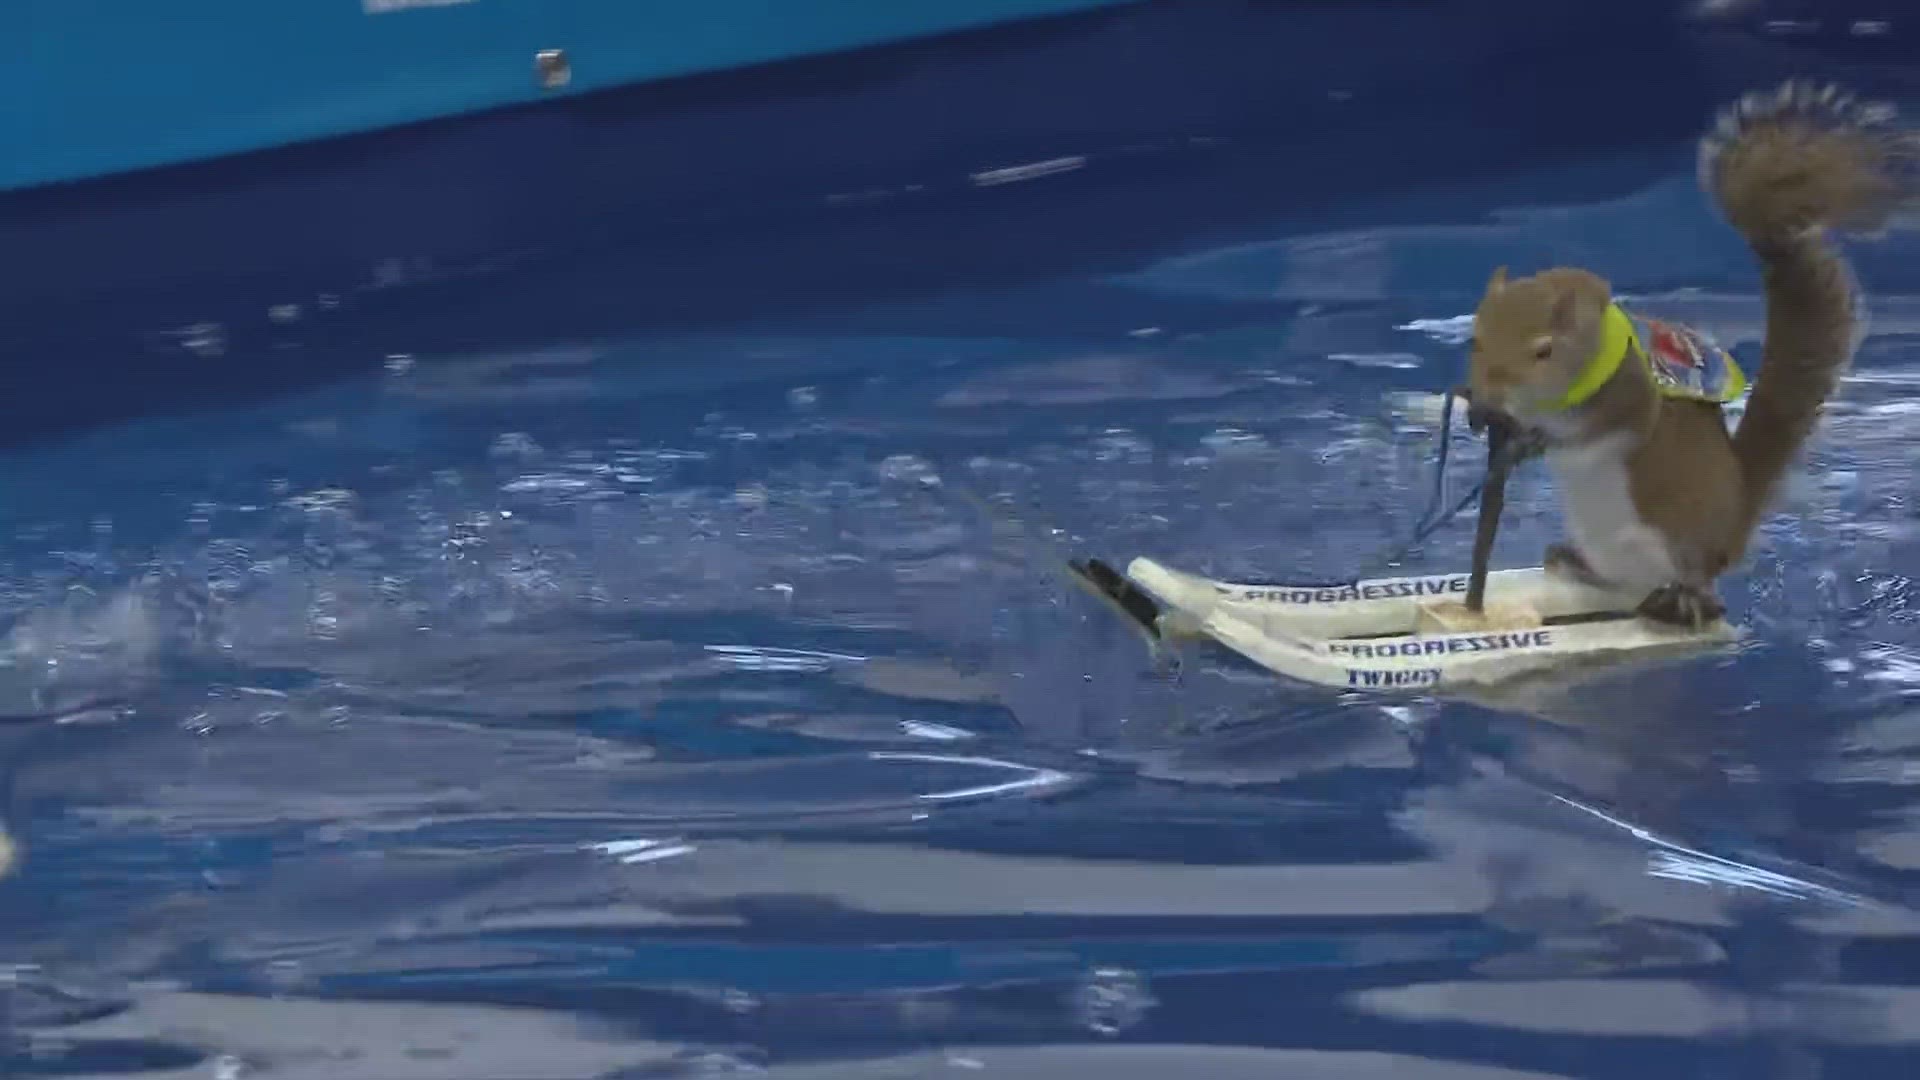 Twiggy The Water Skiing Squirrel is showing off his skills at the Cleveland Boat Show this weekend.